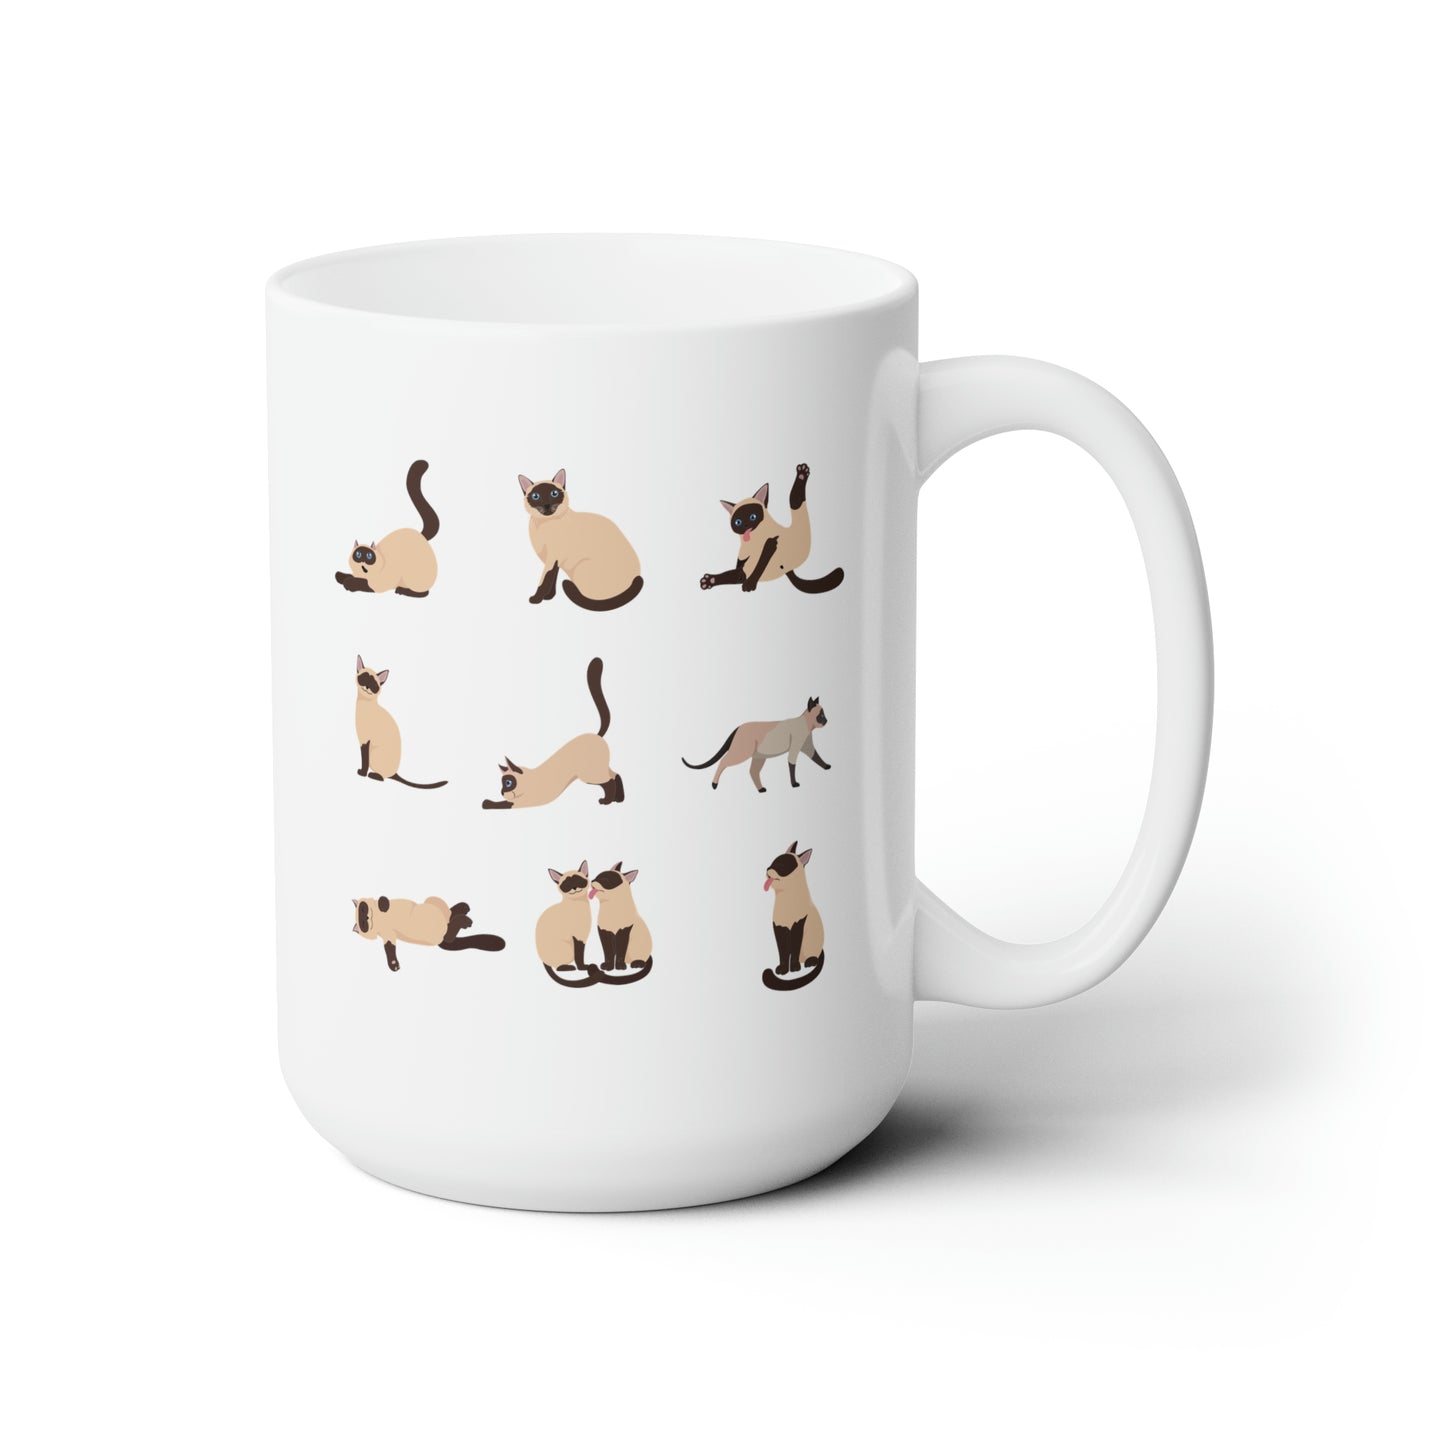 Siamese Cats 15oz white funny large coffee mug gift for cat mom cute kitten pet lover waveywares wavey wares wavywares wavy wares